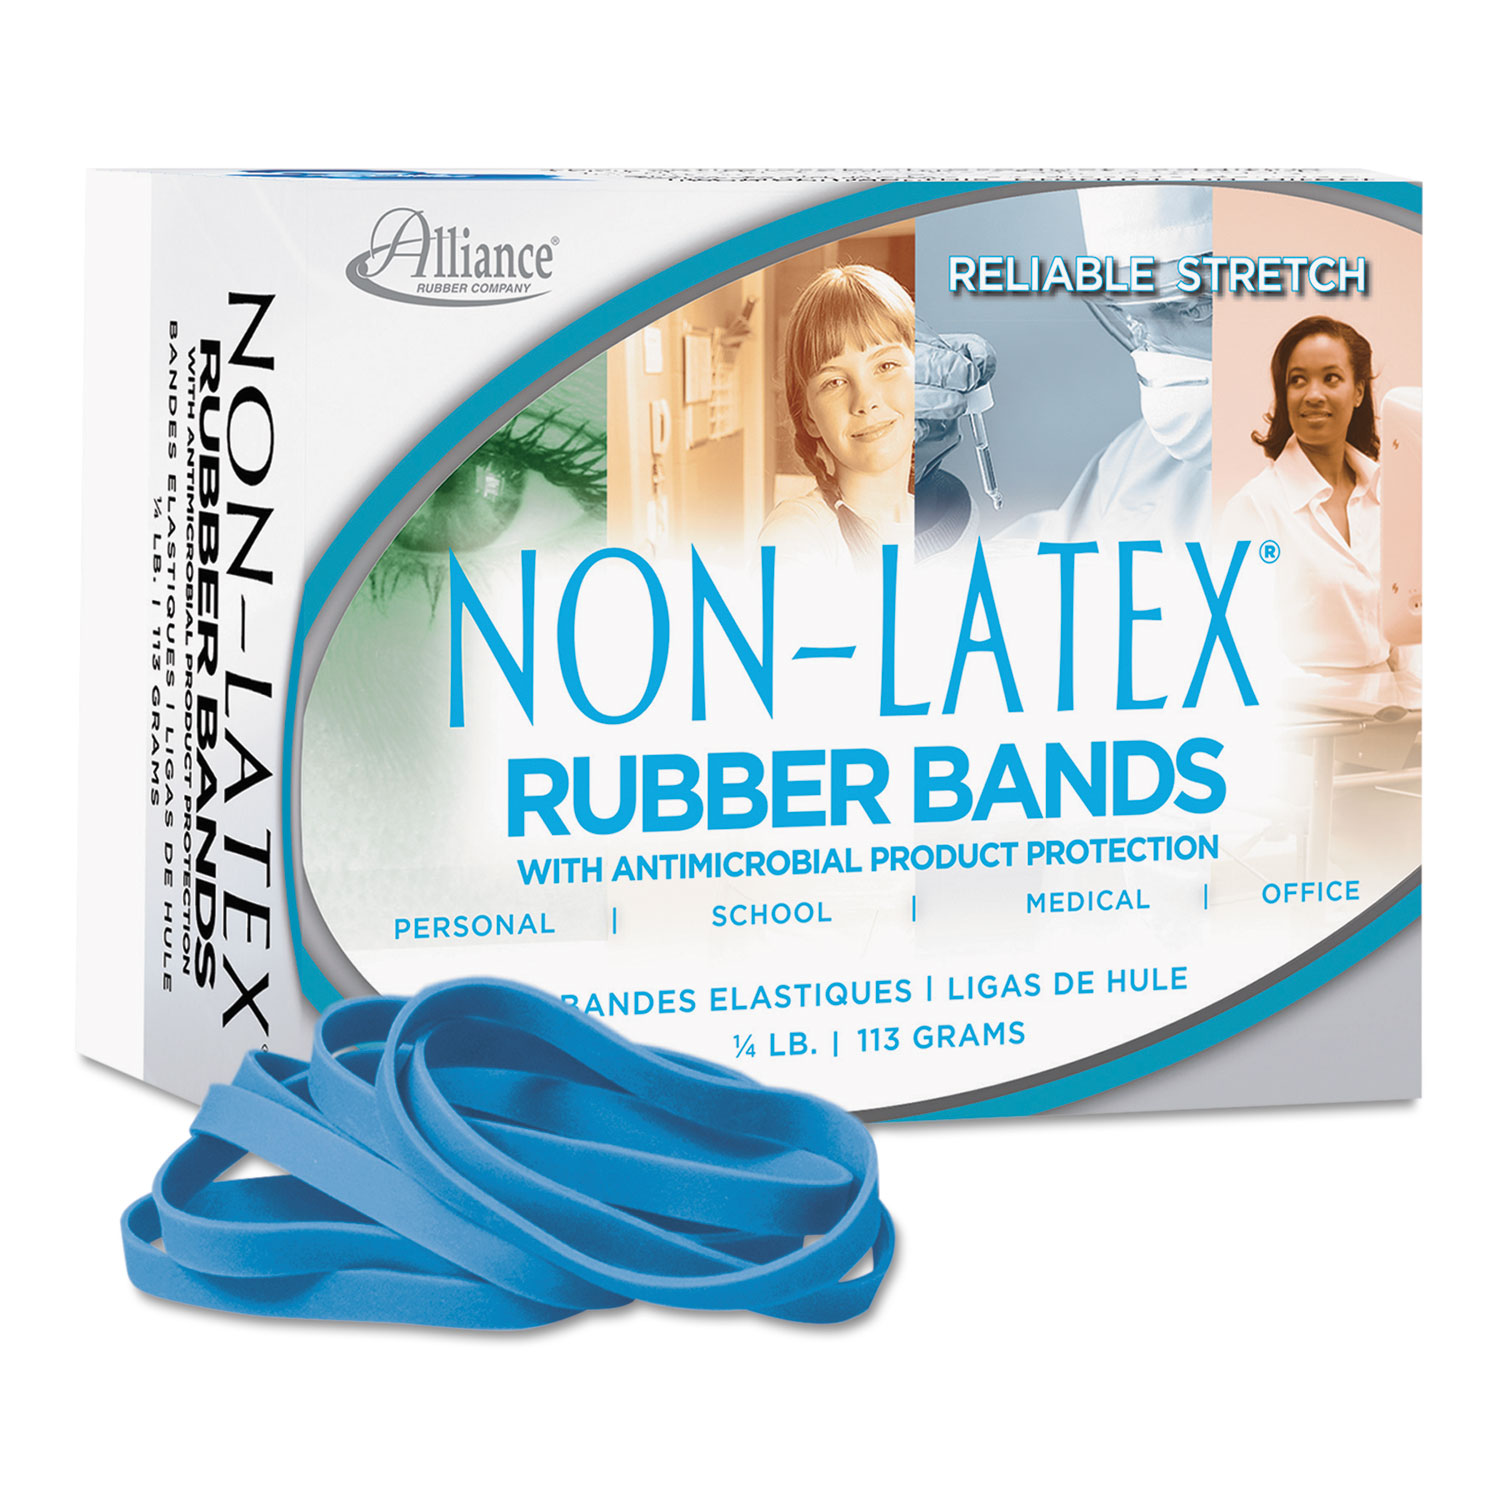 Alliance® Antimicrobial Non-Latex Rubber Bands, Size 64, 0.04 Gauge, Cyan Blue, 4 oz Box, 95/Box